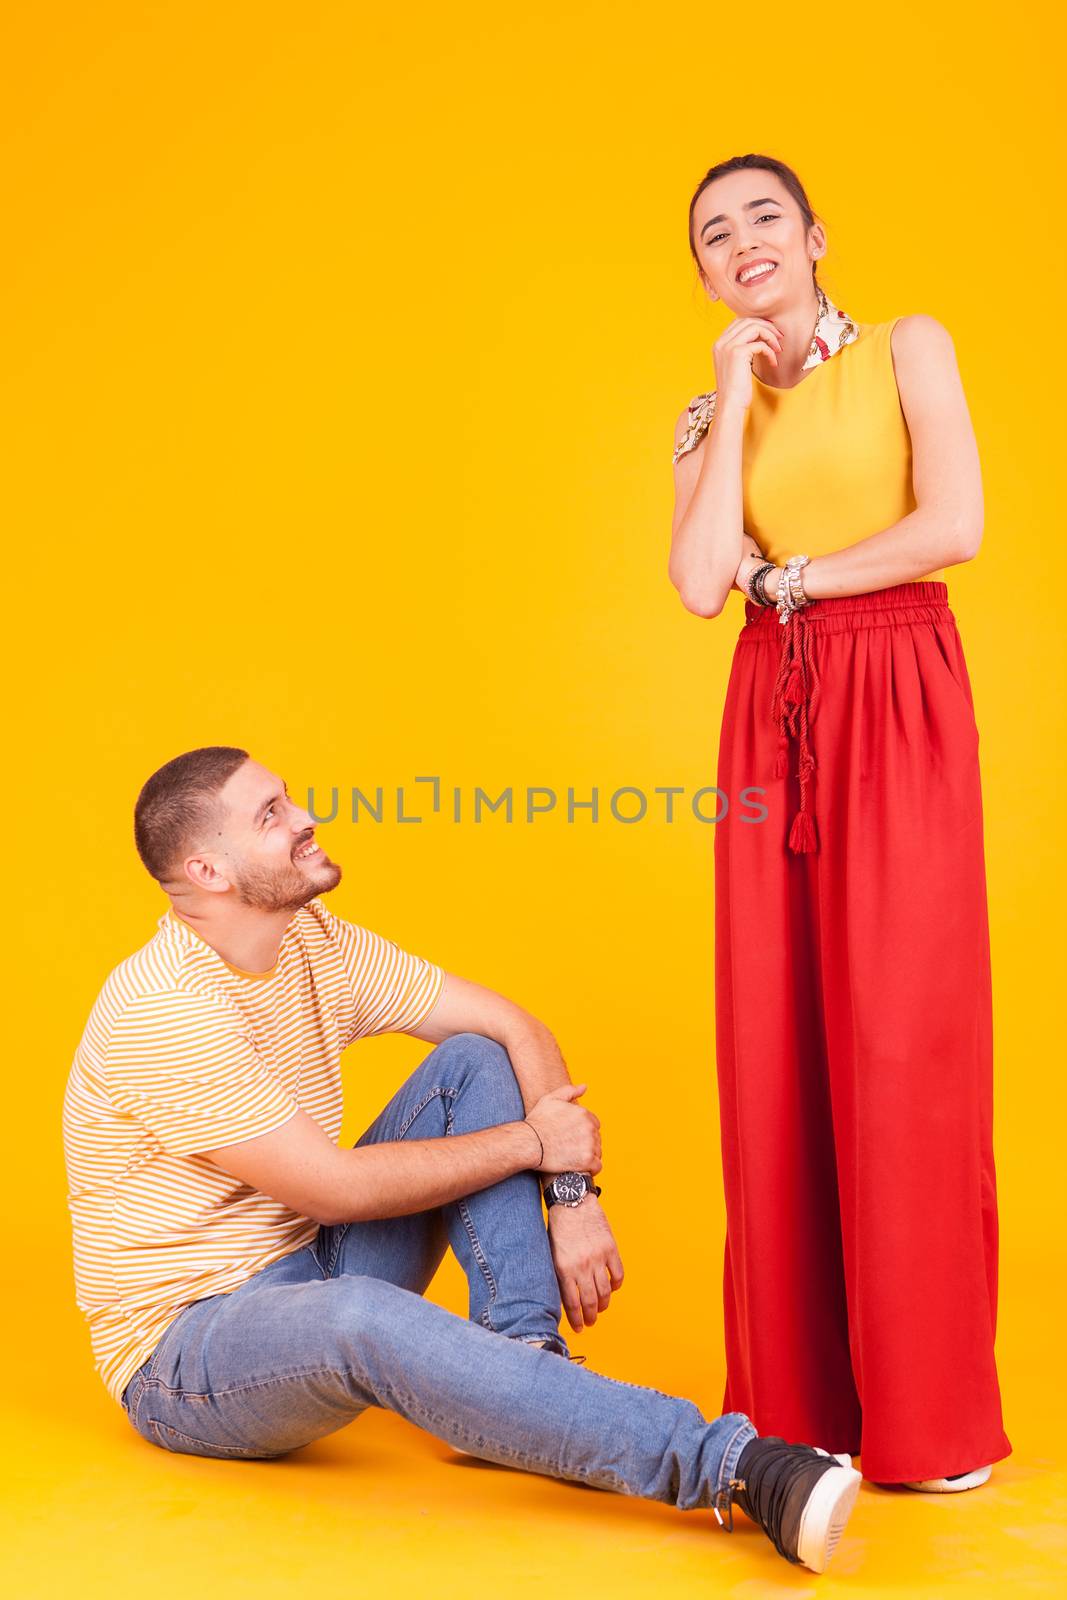 Girl smiling to the camera in studio over yellow background and boyfriend lookin up at her.